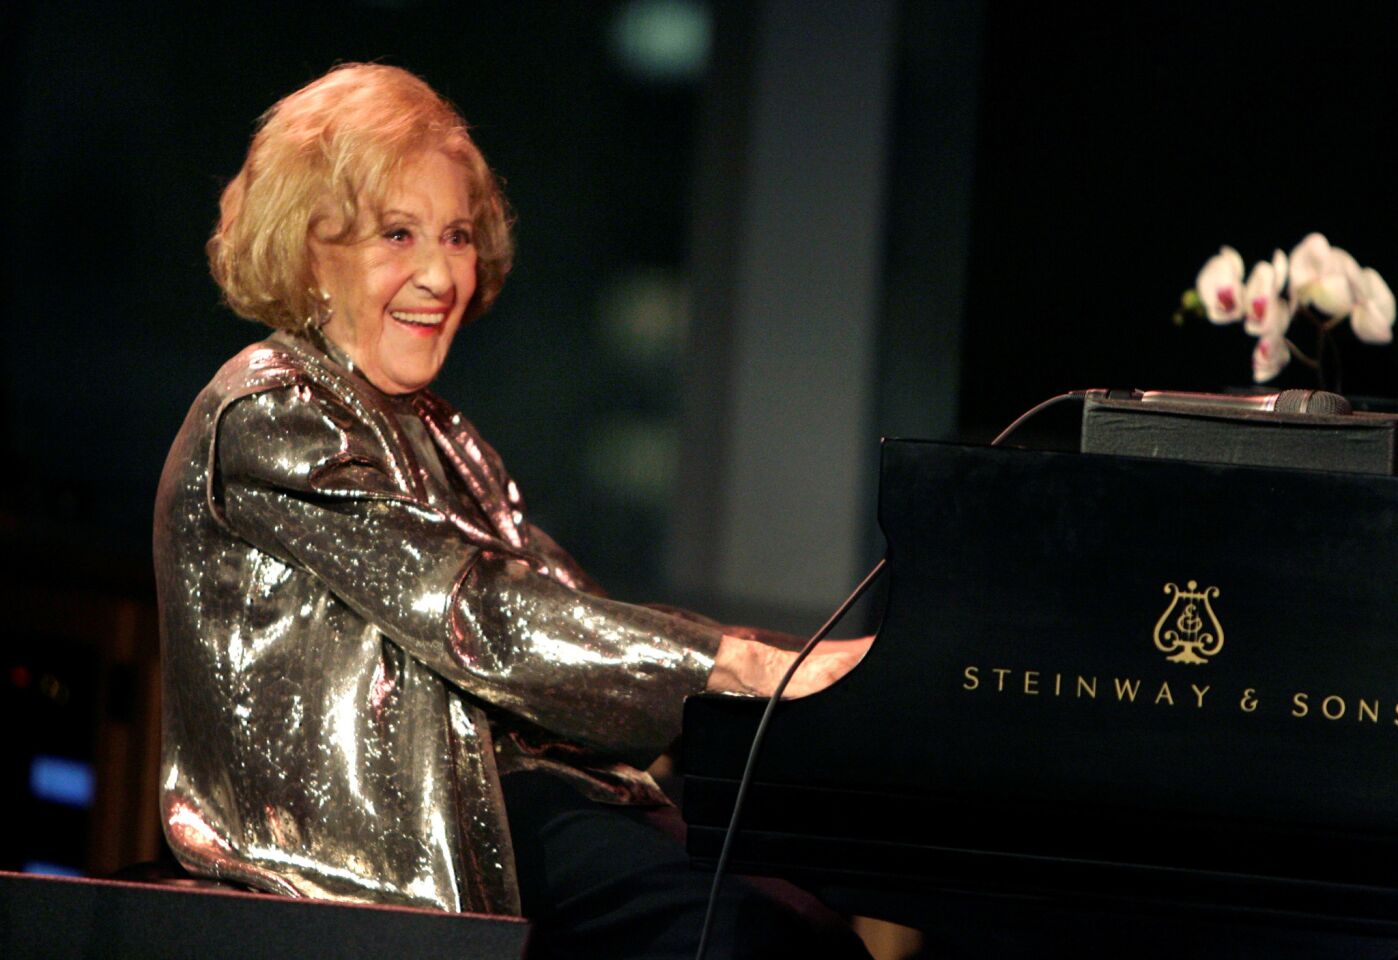 A pianist, composer and host of "Piano Jazz" on NPR, McPartland was one of the genre's most visible female instrumentalists. Her highly personal style was rich with colorful harmonies and briskly swinging rhythms. She was 95. Full obituary Notable deaths of 2012